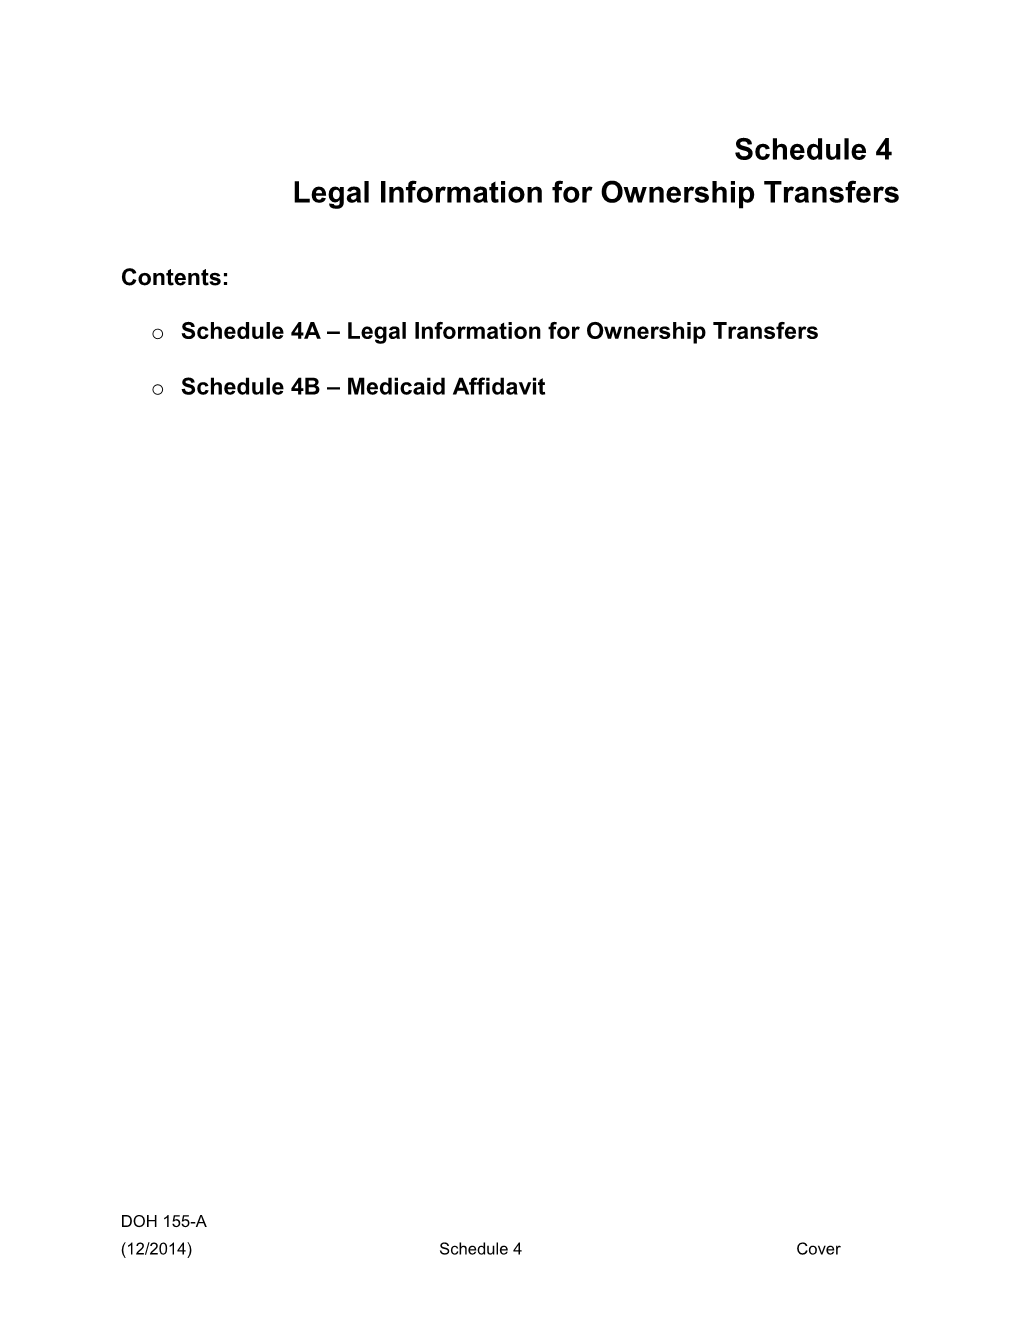 Legal Information for Ownership Transfers